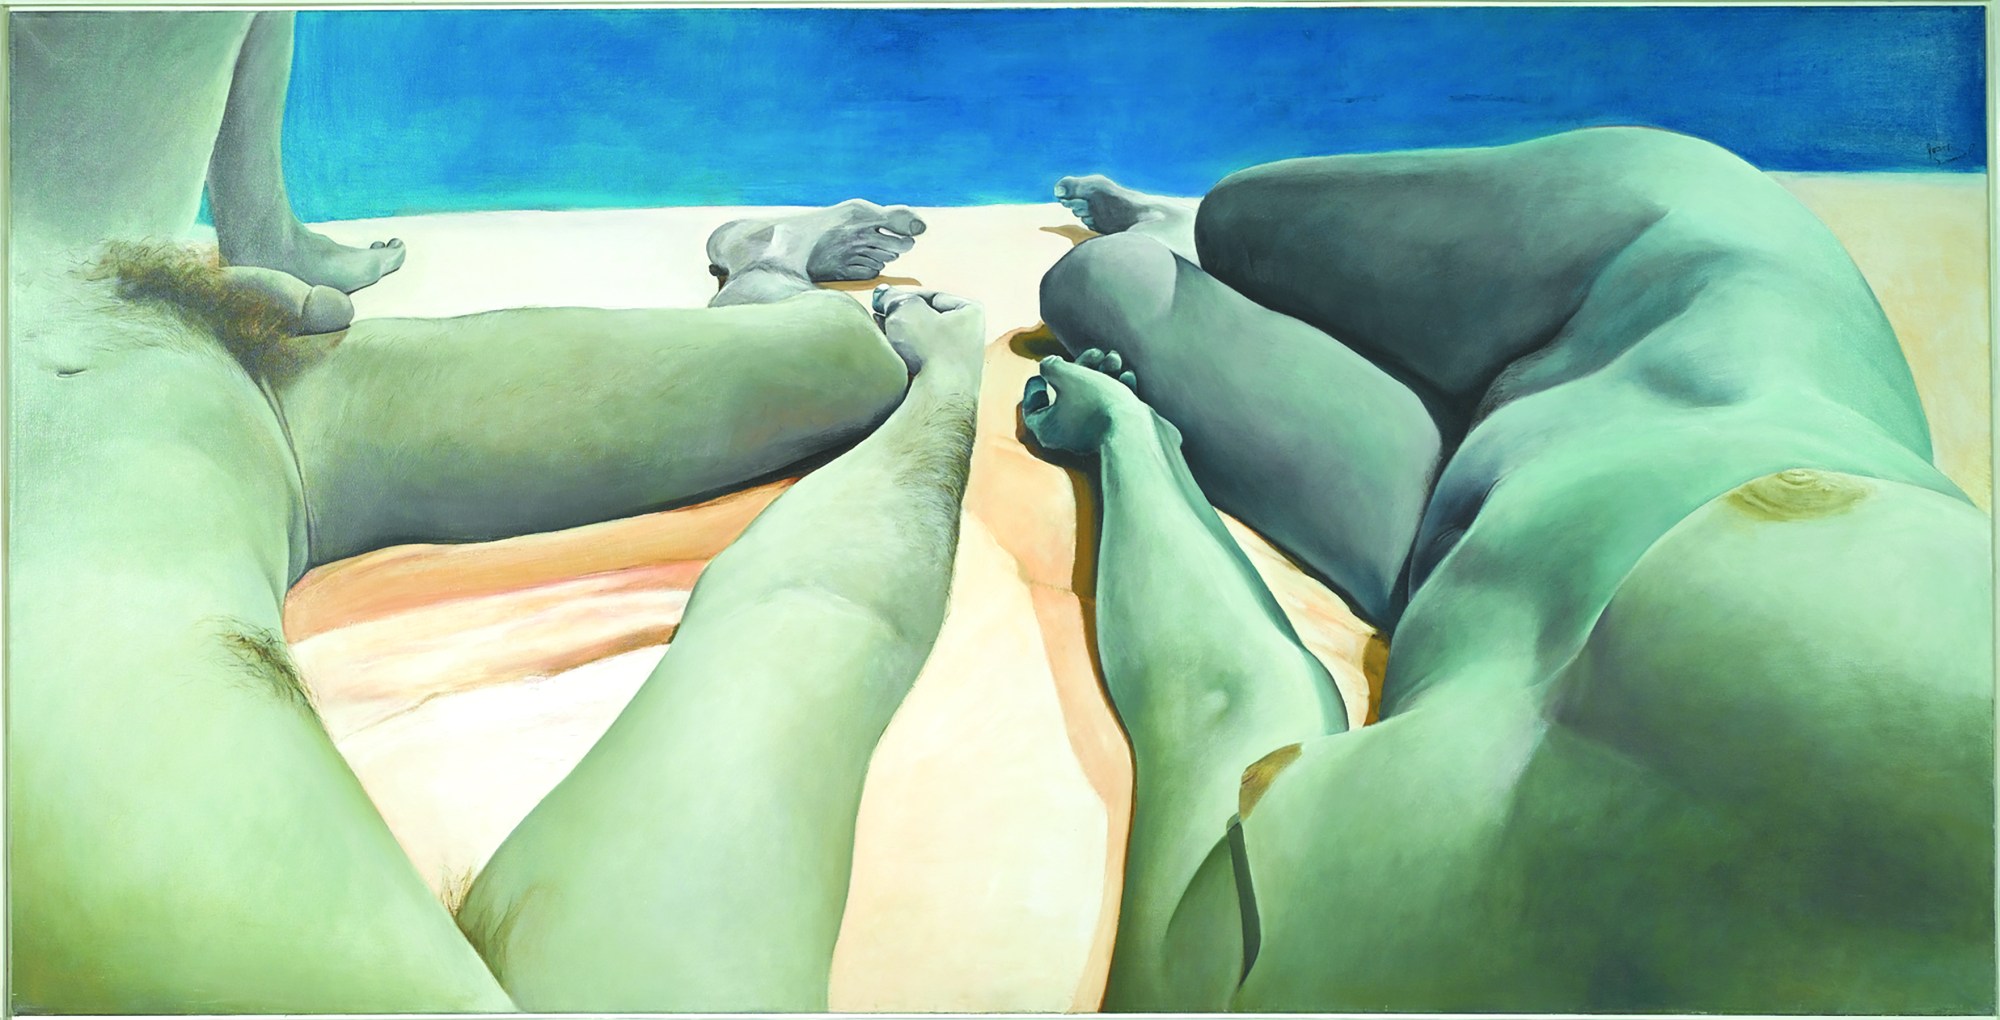 A man and a woman with greenish skin lie naked, side by side, seen from the neck down.